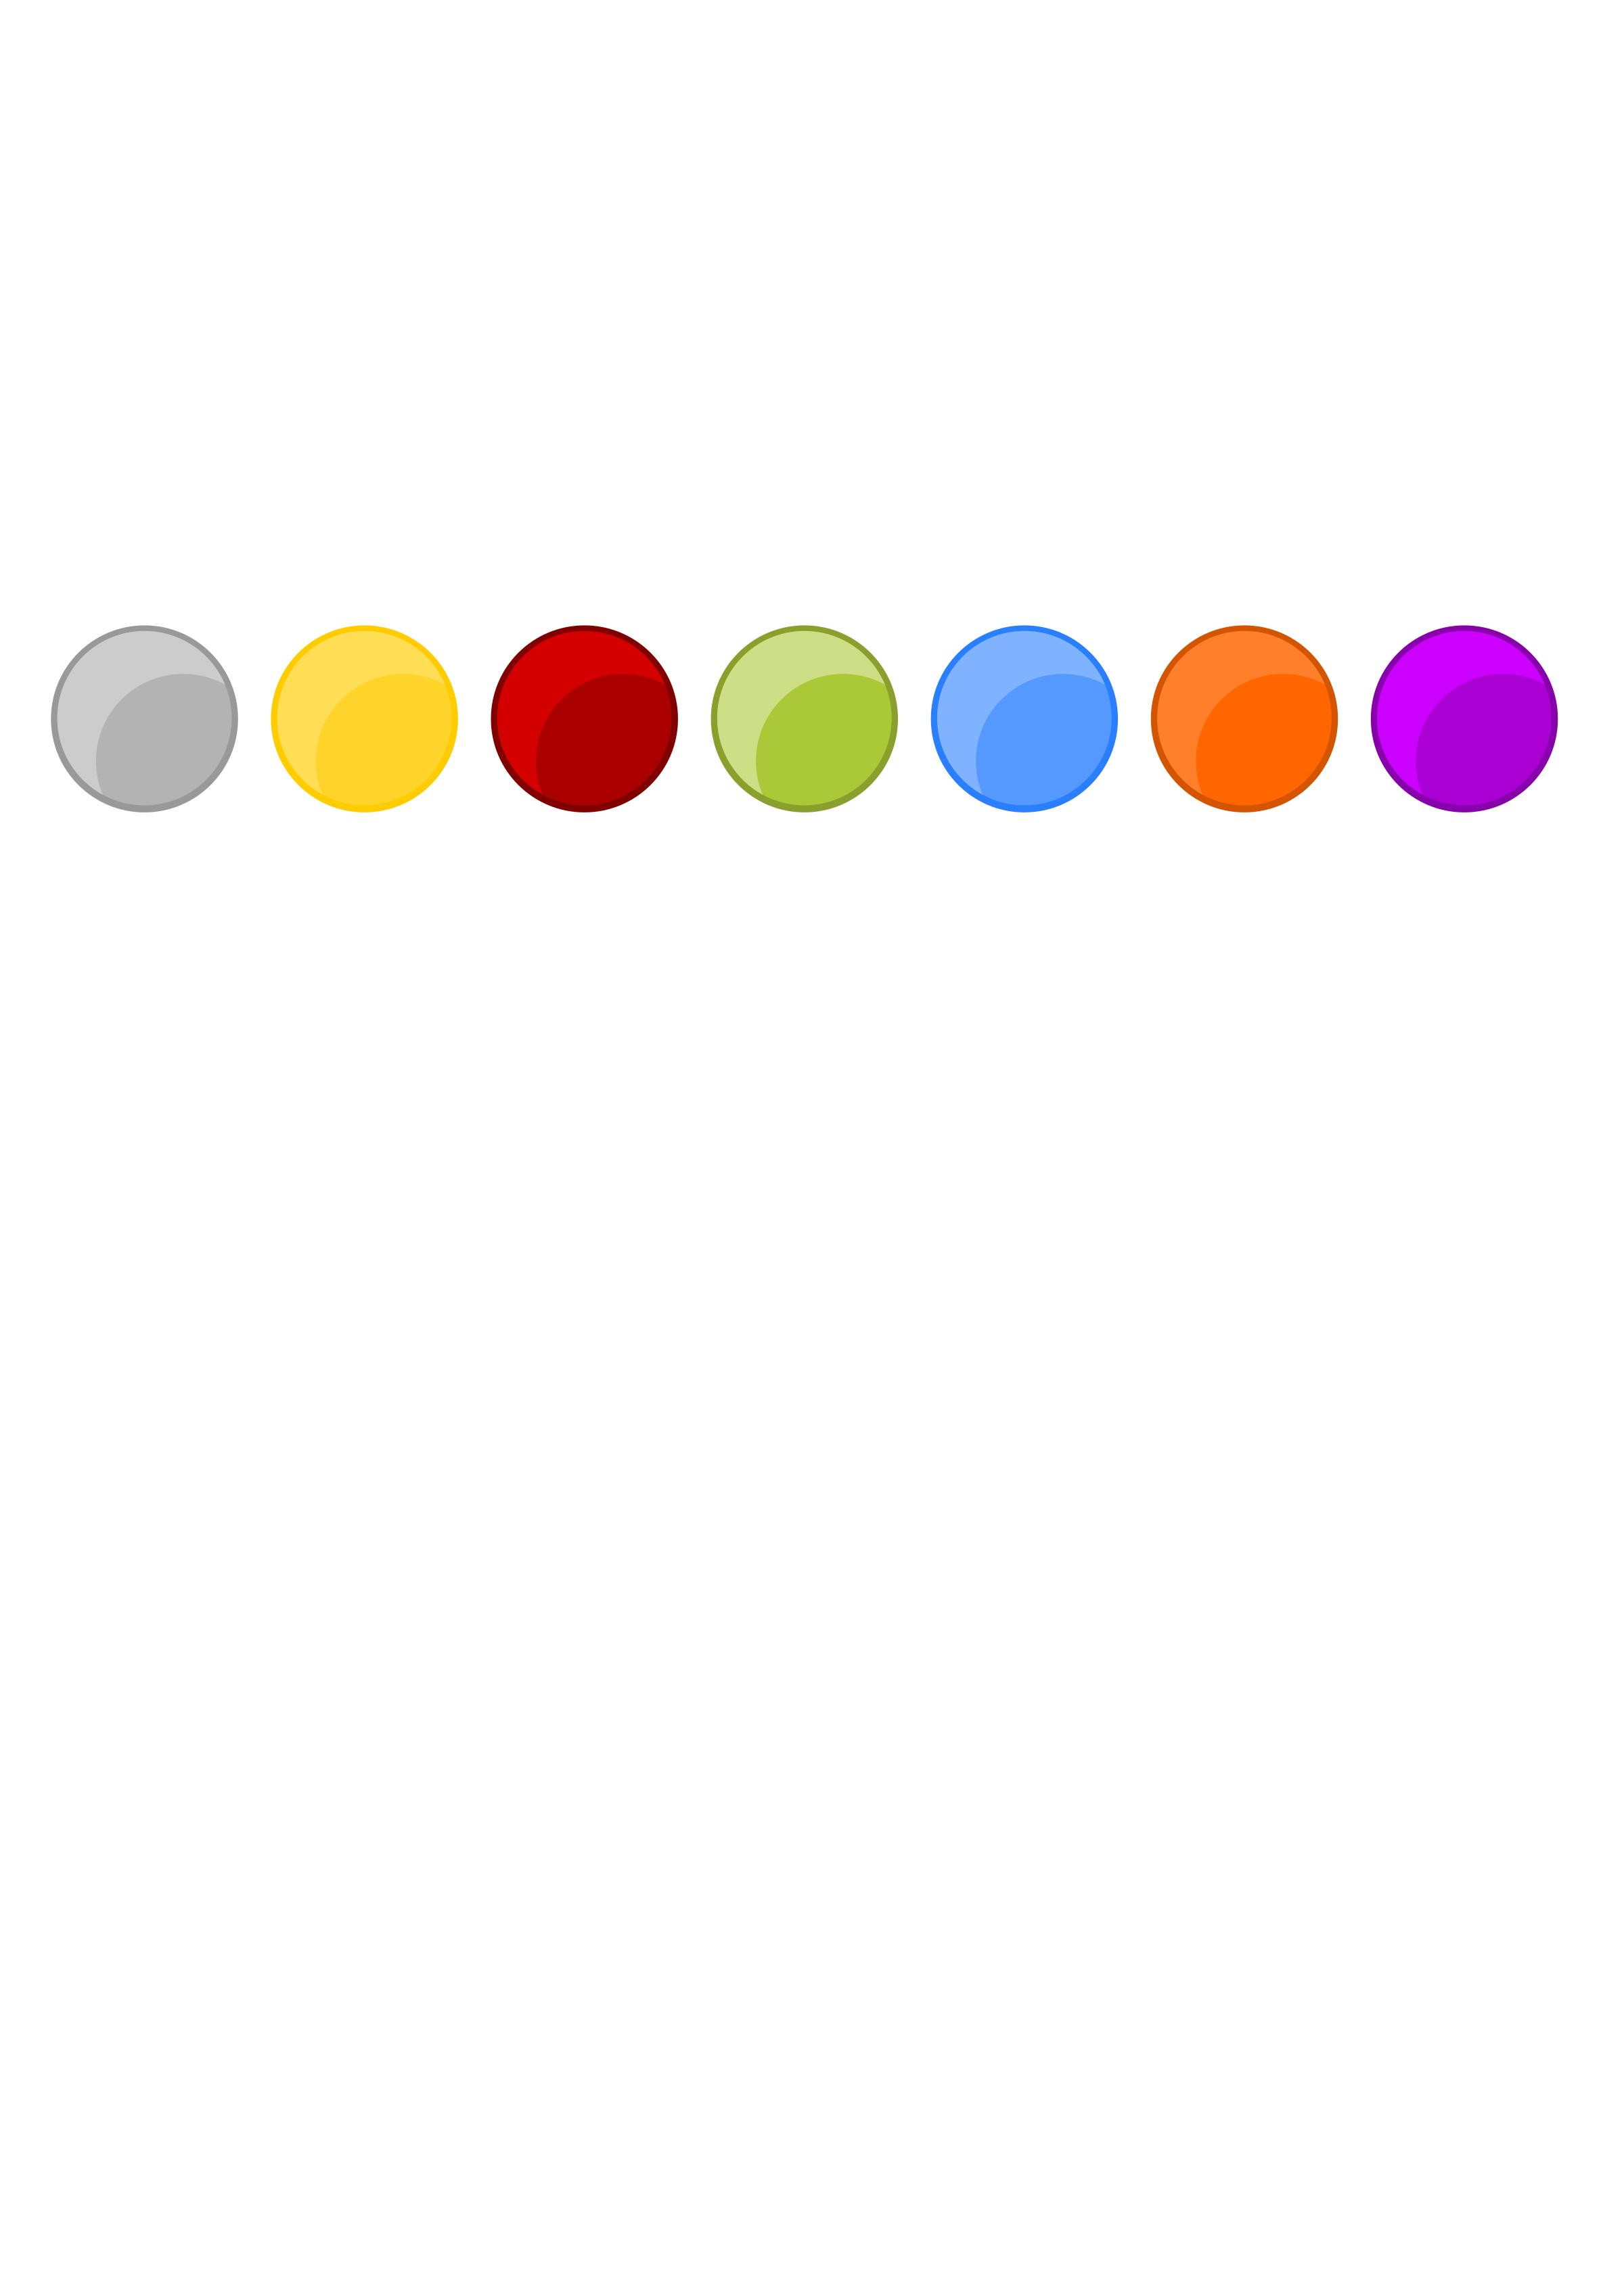 Colorful Circle Icon Backgrounds PNG icons